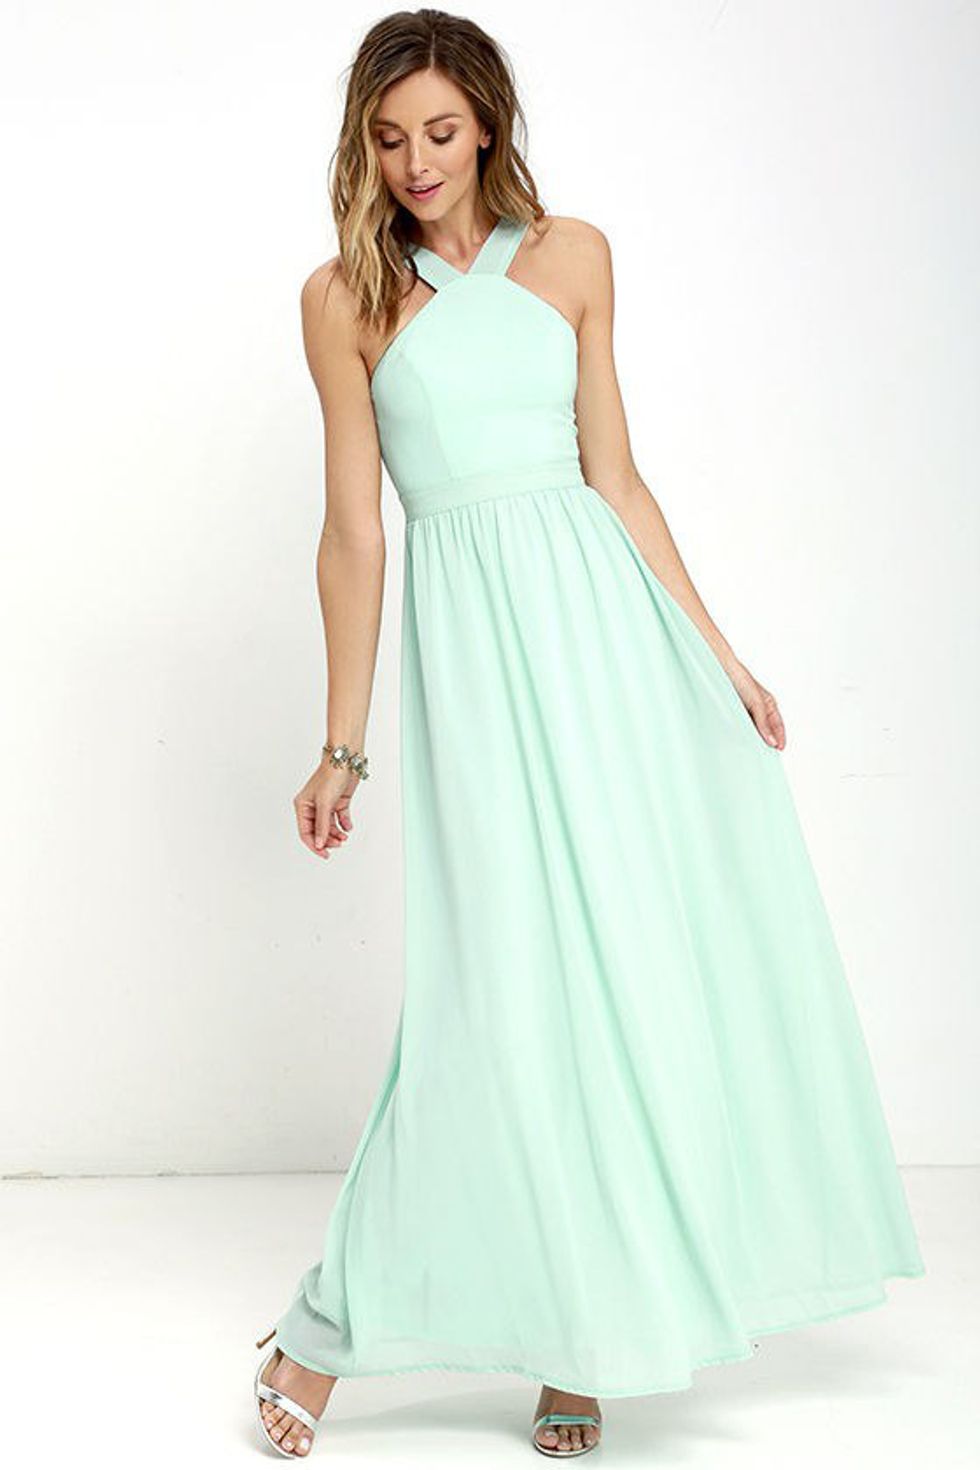 10 Dresses To Wear To A Sorority Or Fraternity Formal